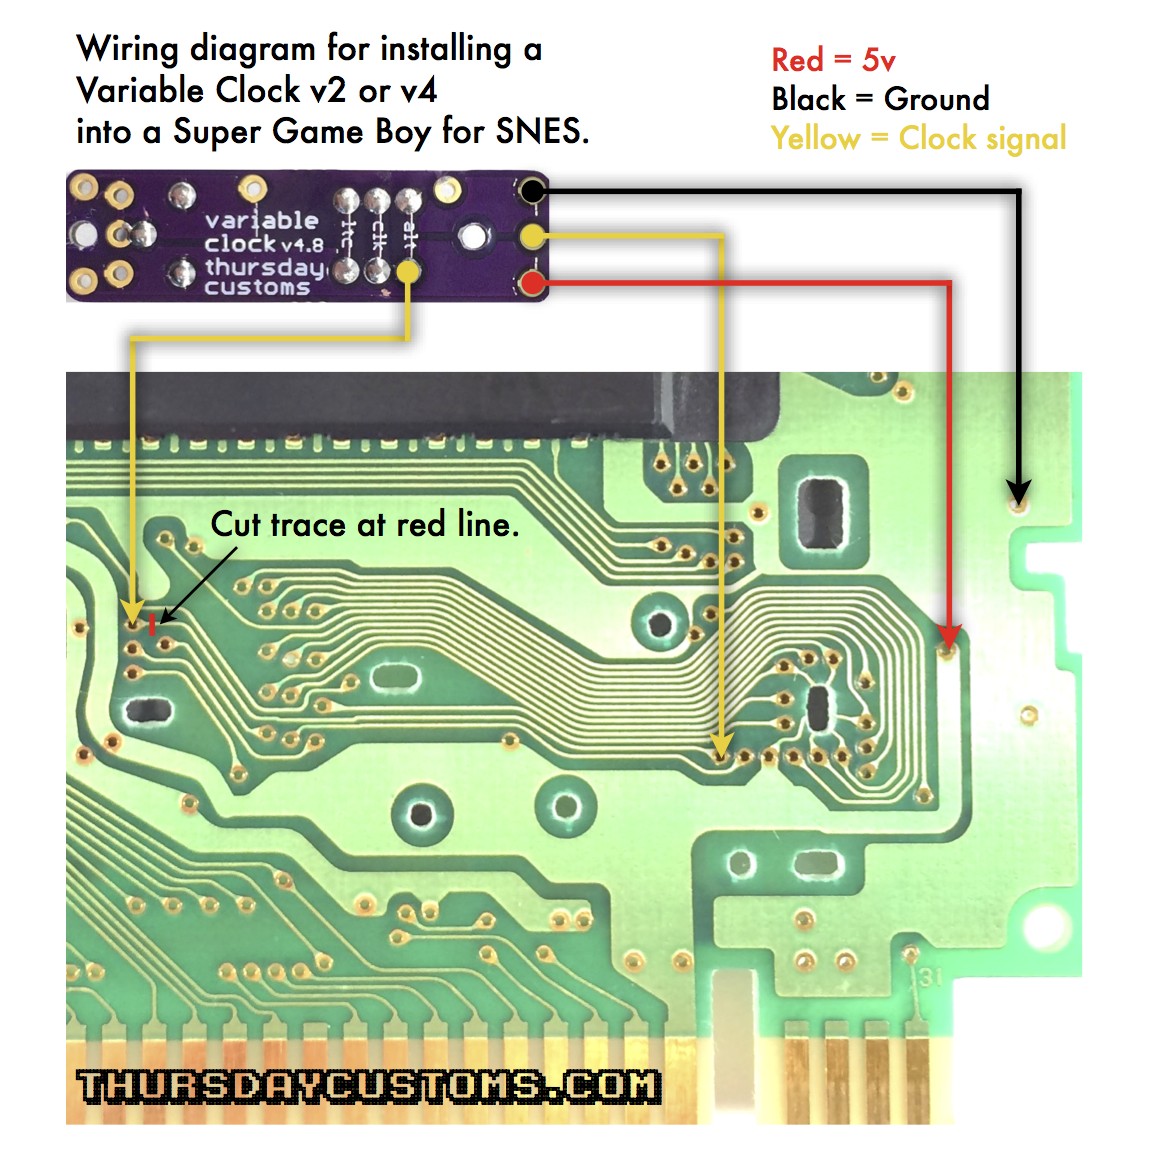 For installation into a Super Game Boy cartridge for SNES follow this wiring diagram